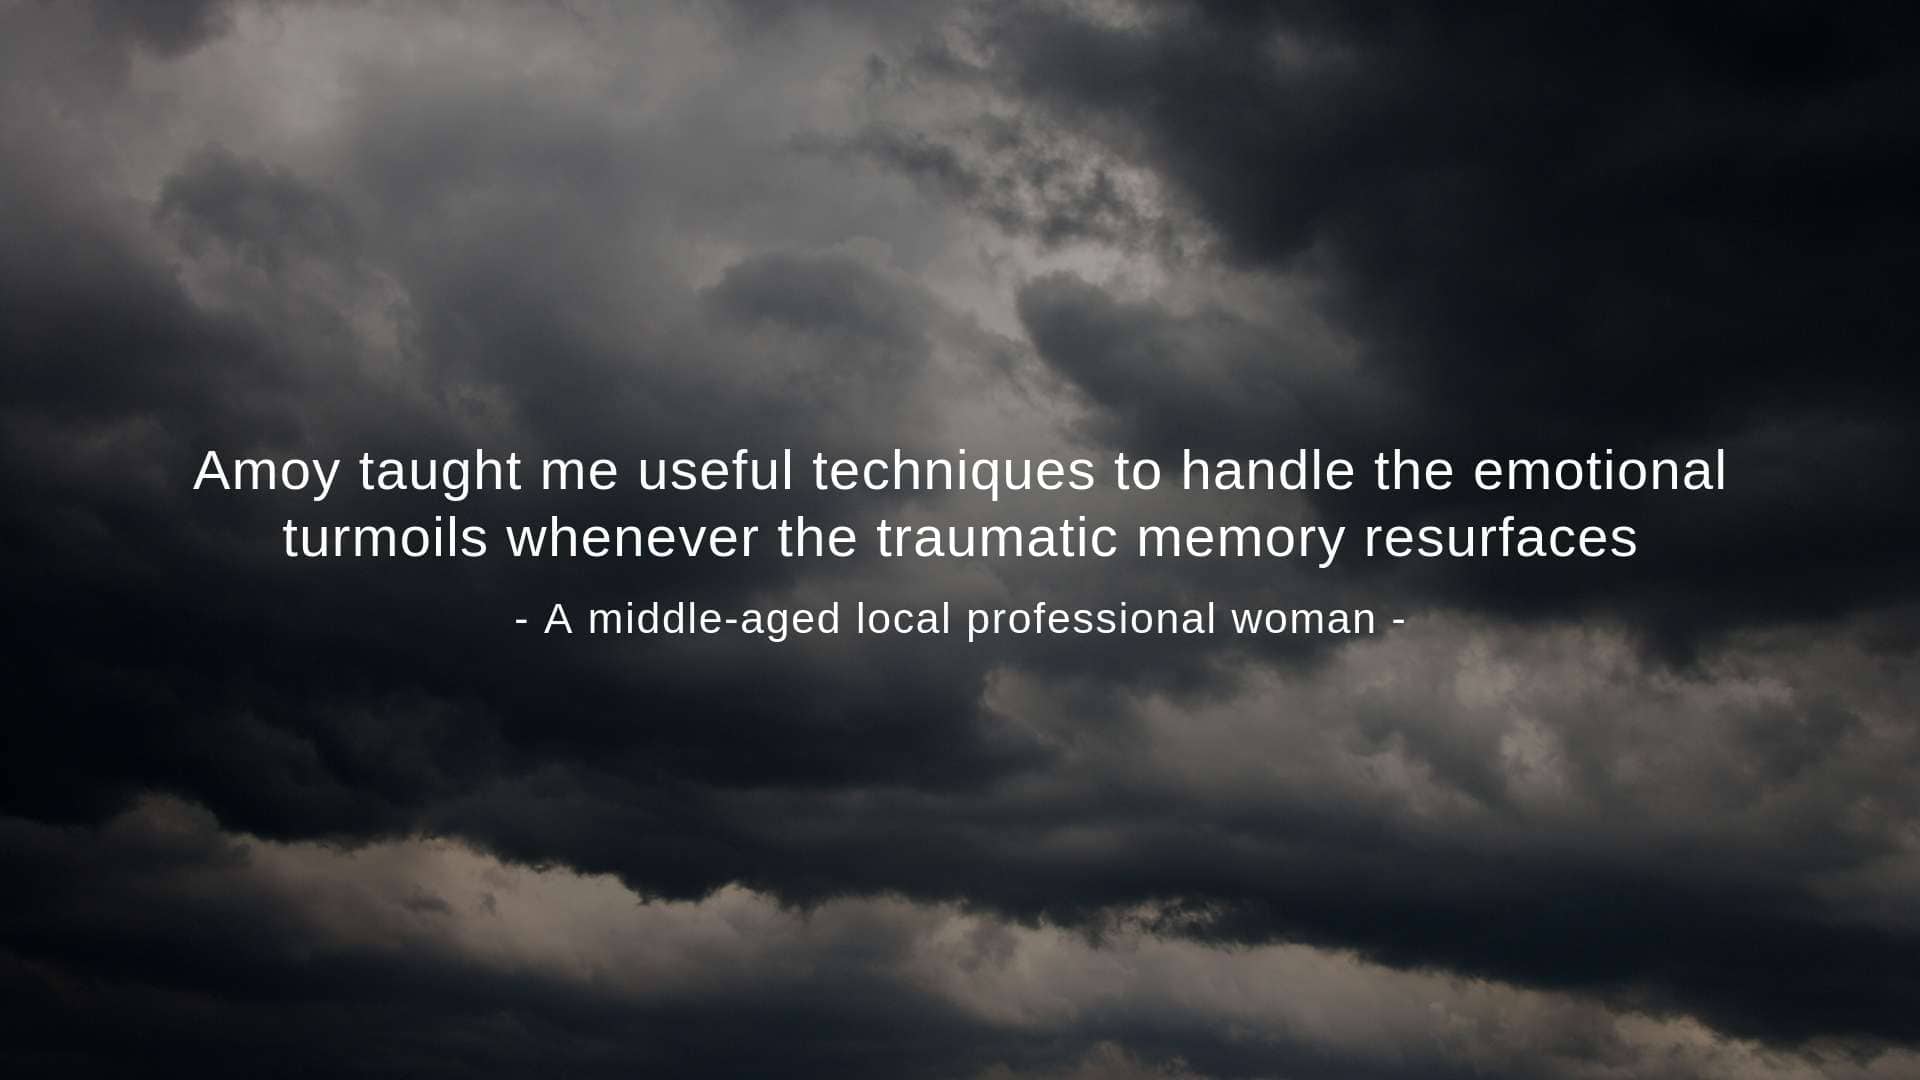 "Amoy taught me useful techniques to handle the emotional turmoils whenever the traumatic memory resurfaces," a middle-aged local professional woman said